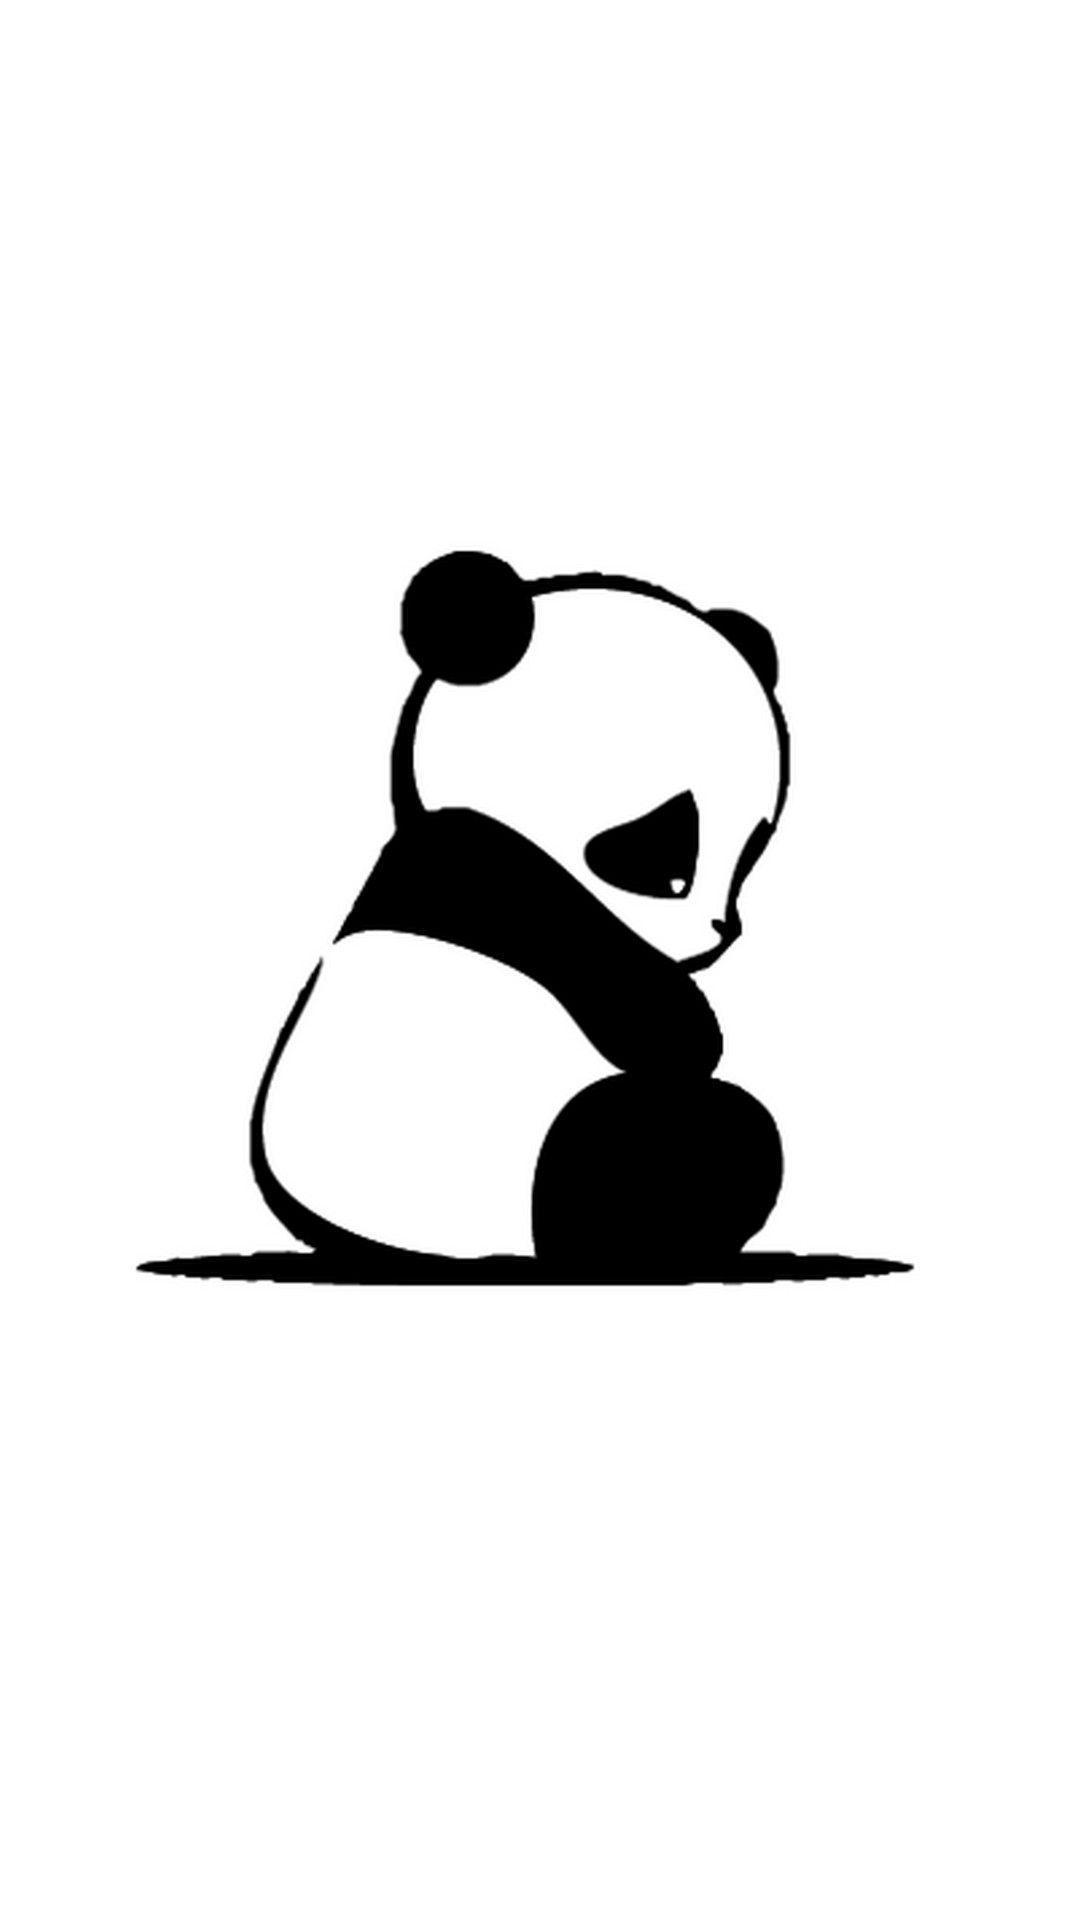 Cute Baby Panda Wallpaper For Mobile. Best HD Wallpaper. Cute panda wallpaper, Panda drawing, Panda background